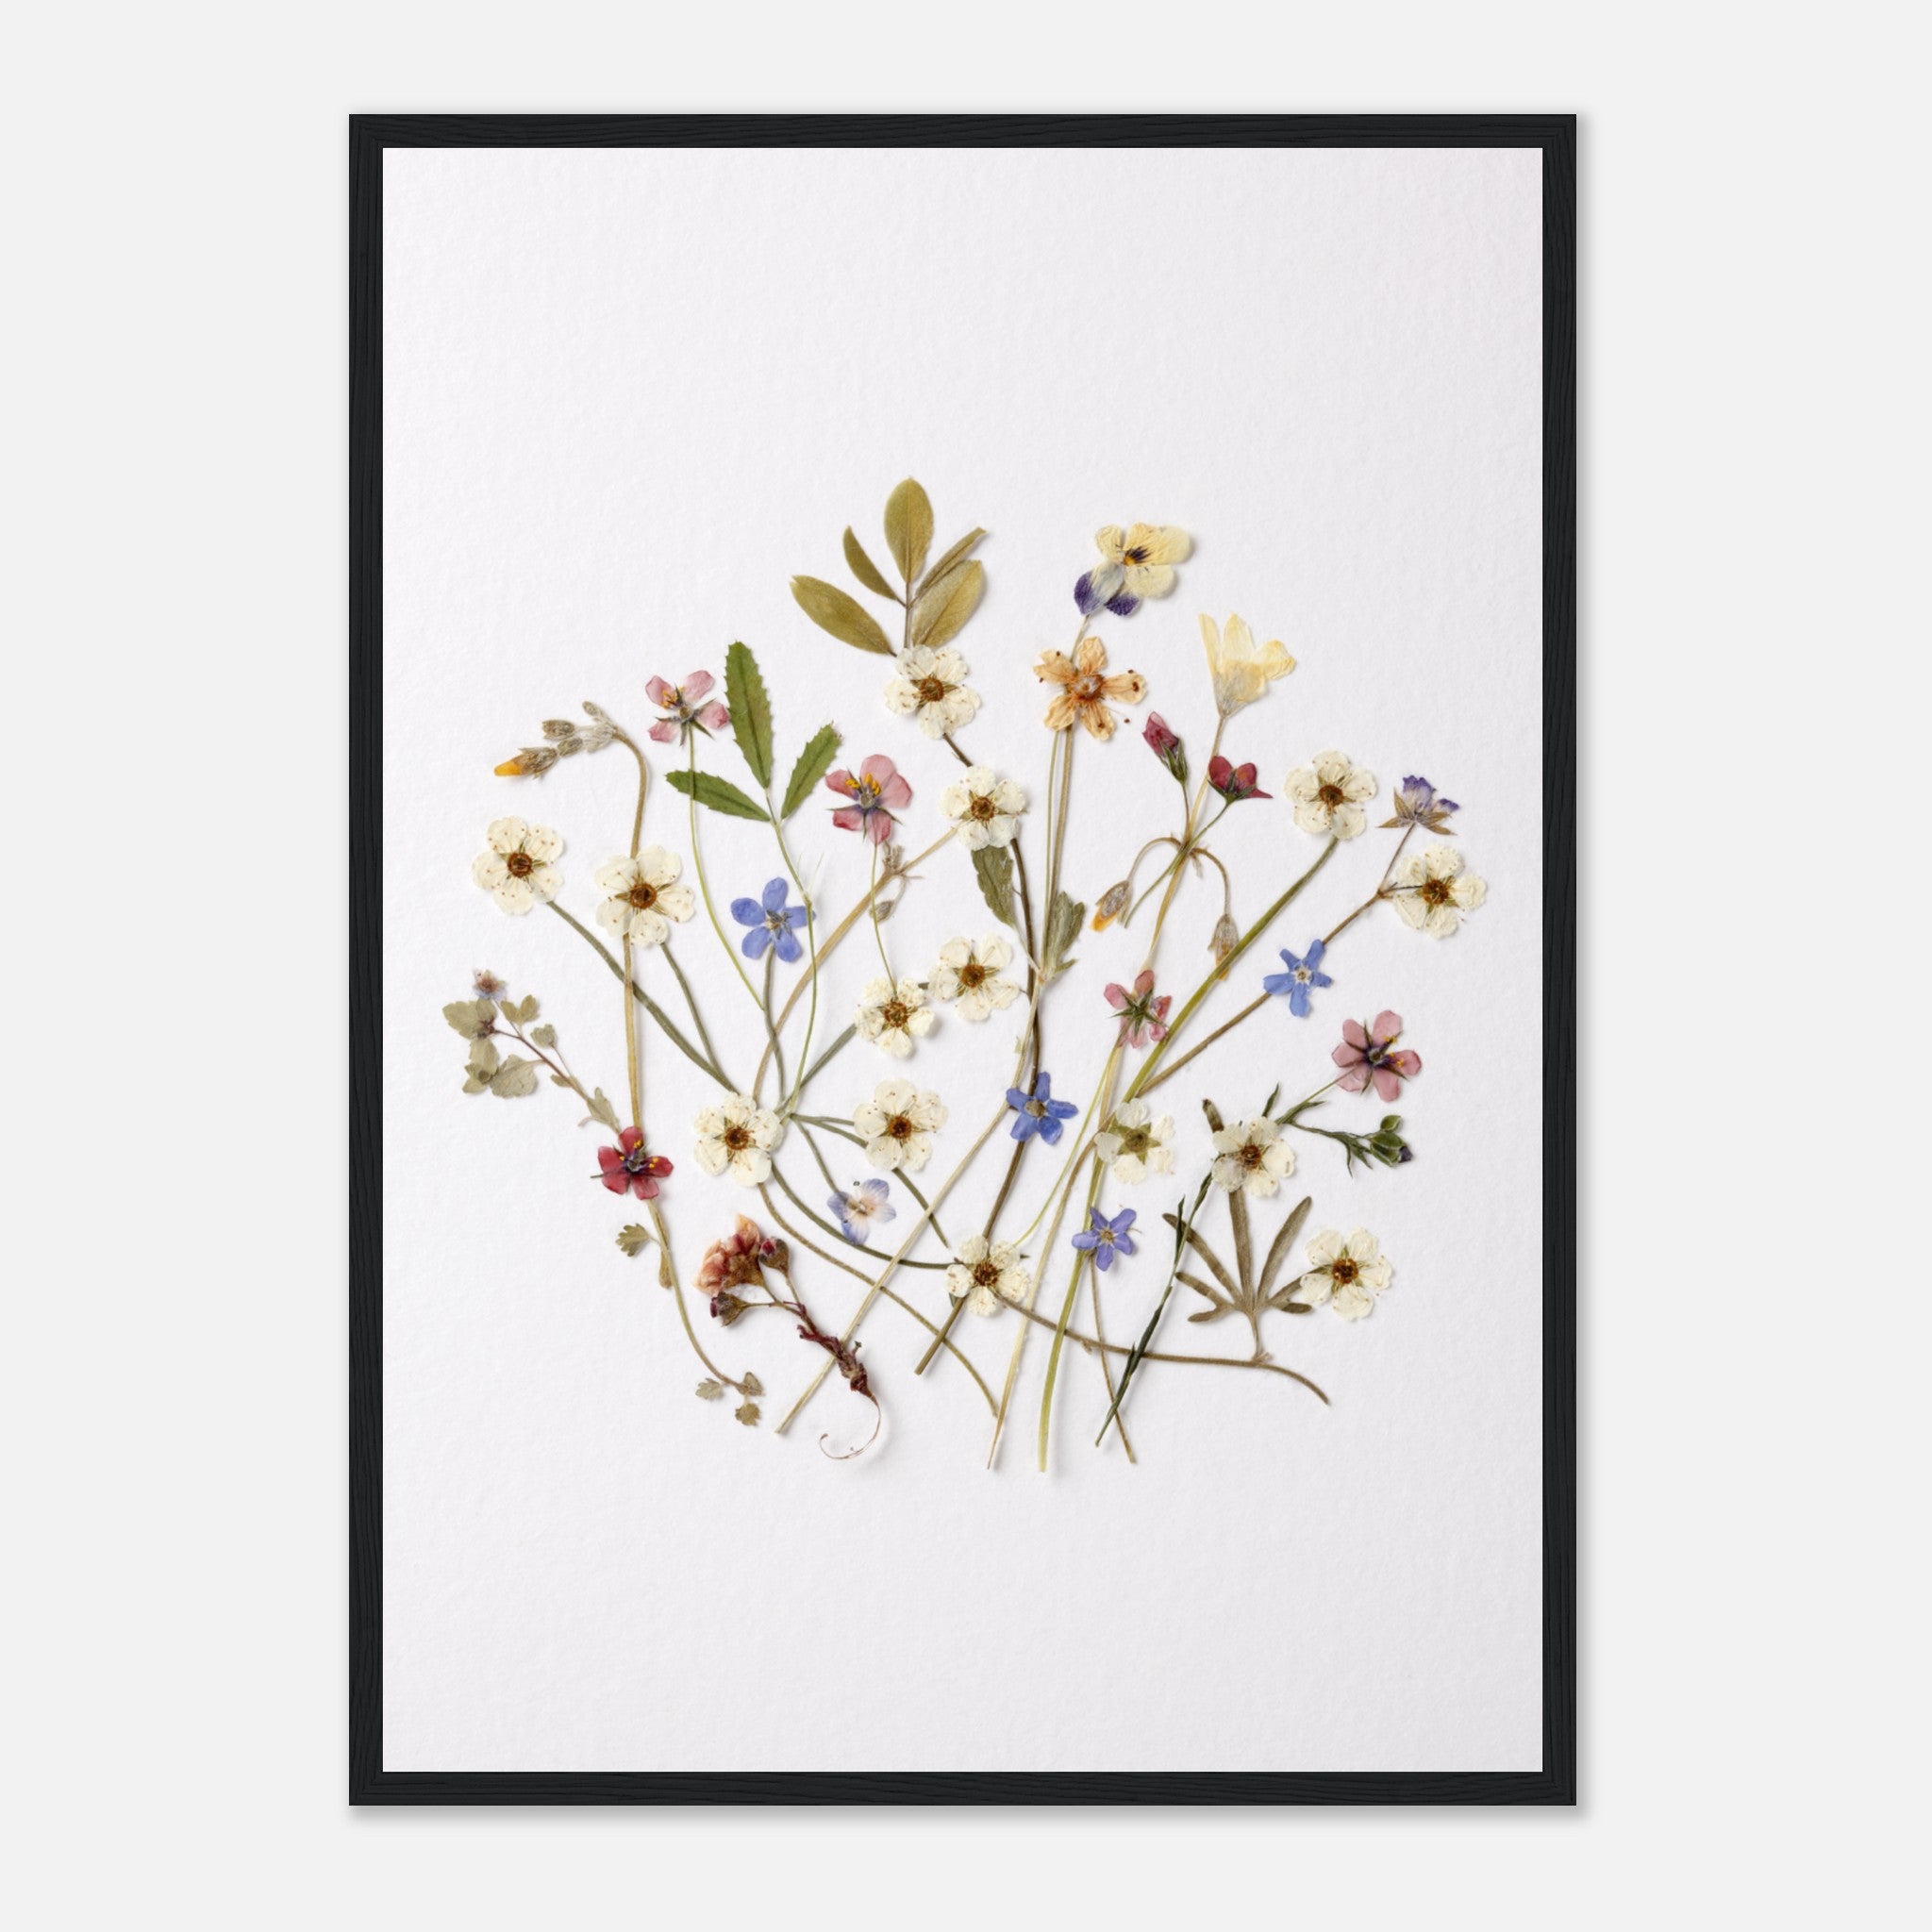 Dried Flowers On Textured Paper 3 Poster